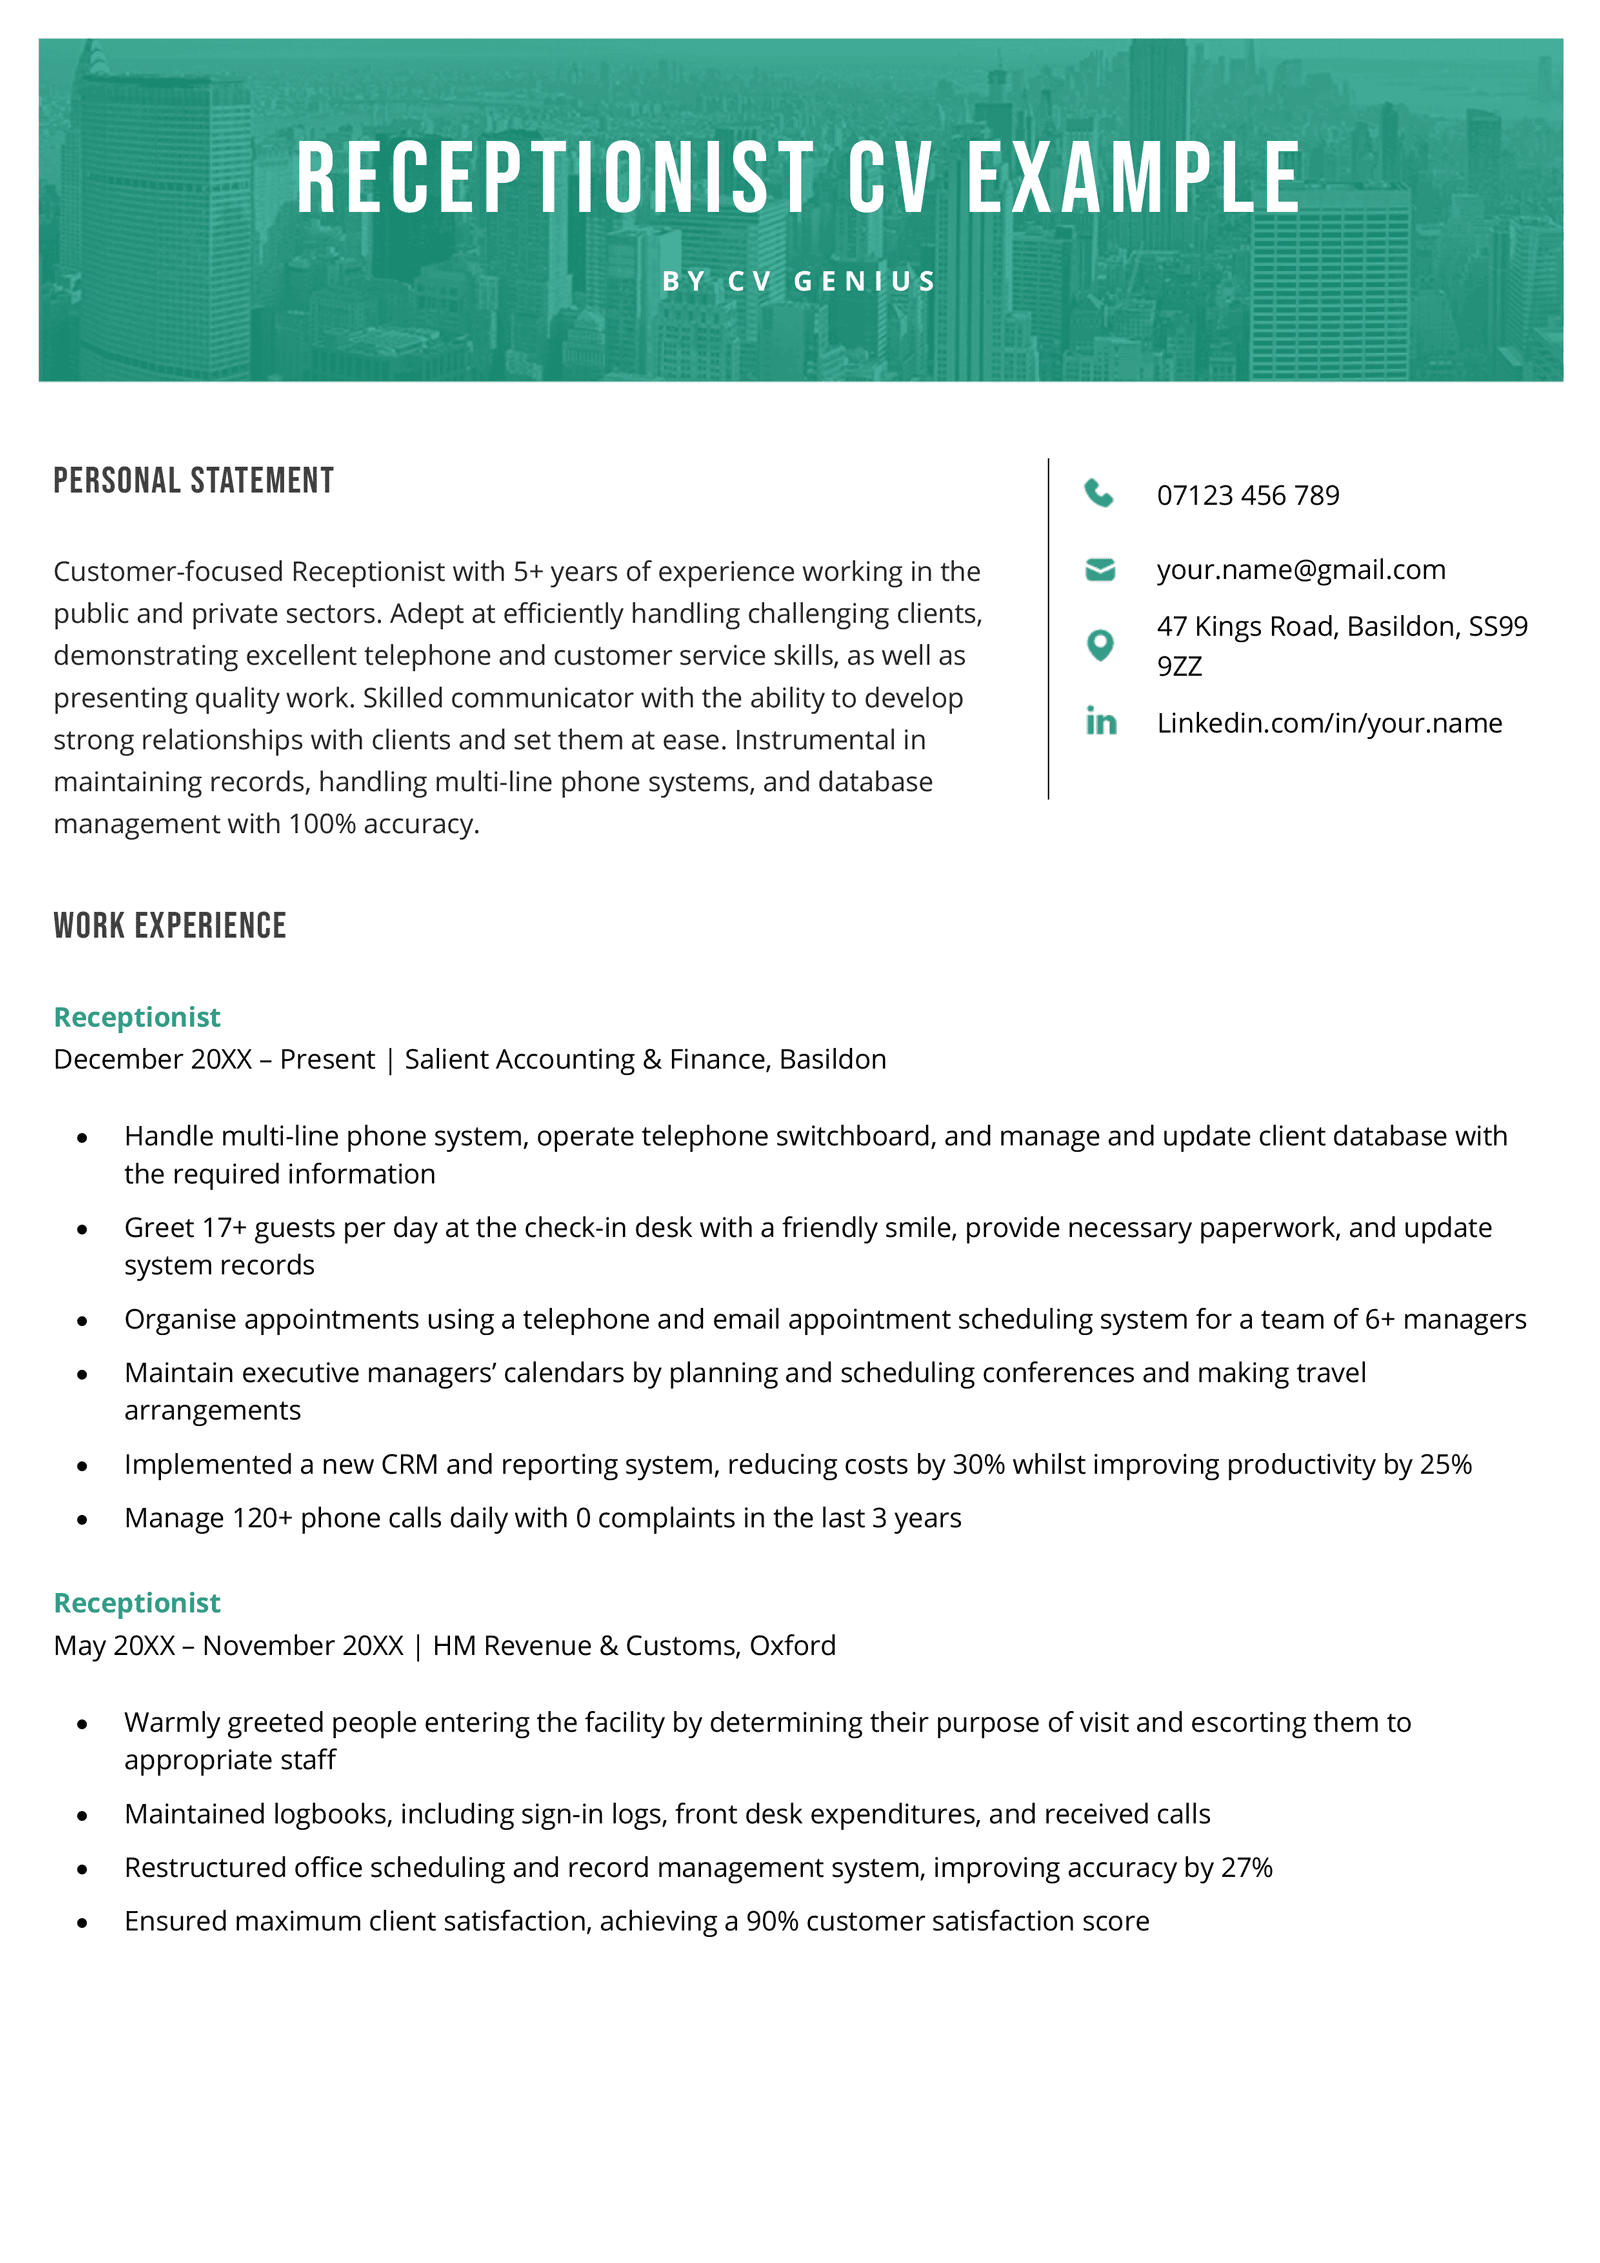 Example of a receptionist CV.